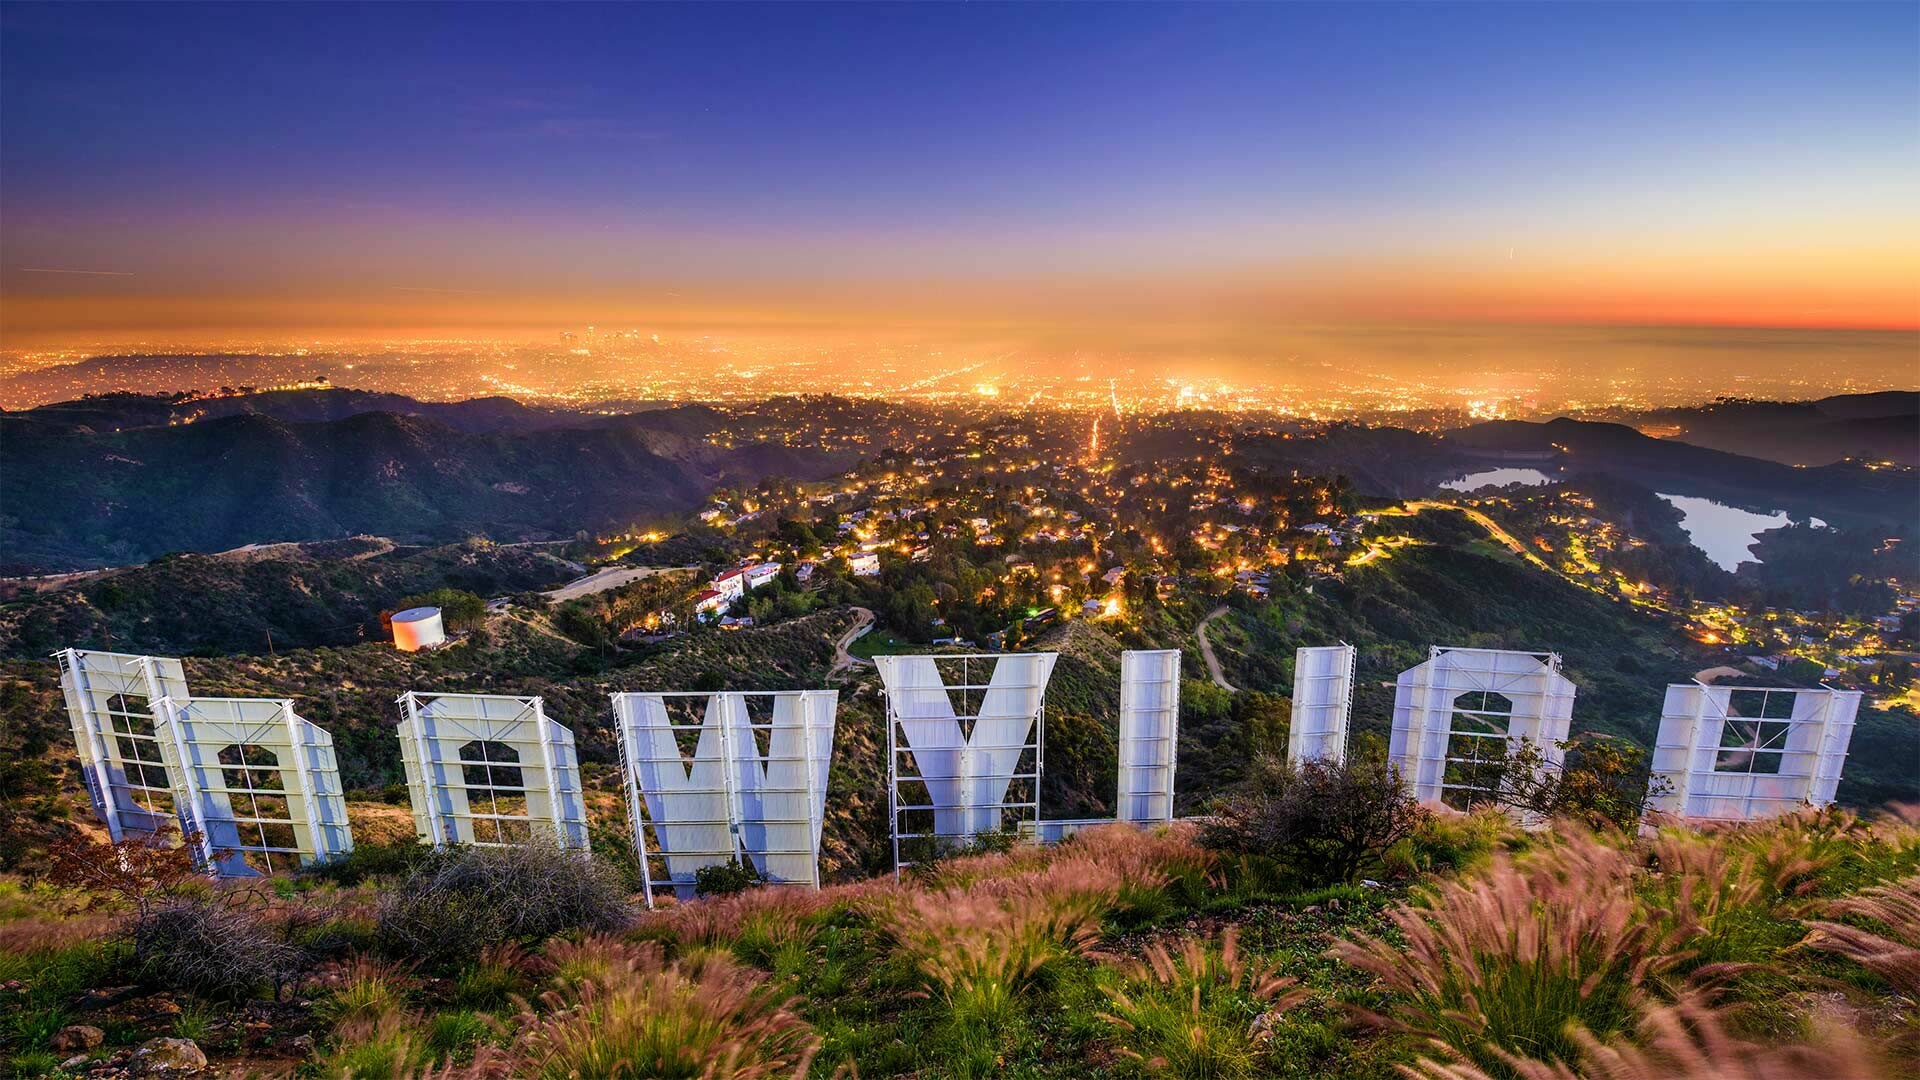 Hollywood Sign: Los Angeles, USA, A symbol of the movie industry since 1923. 1920x1080 Full HD Wallpaper.